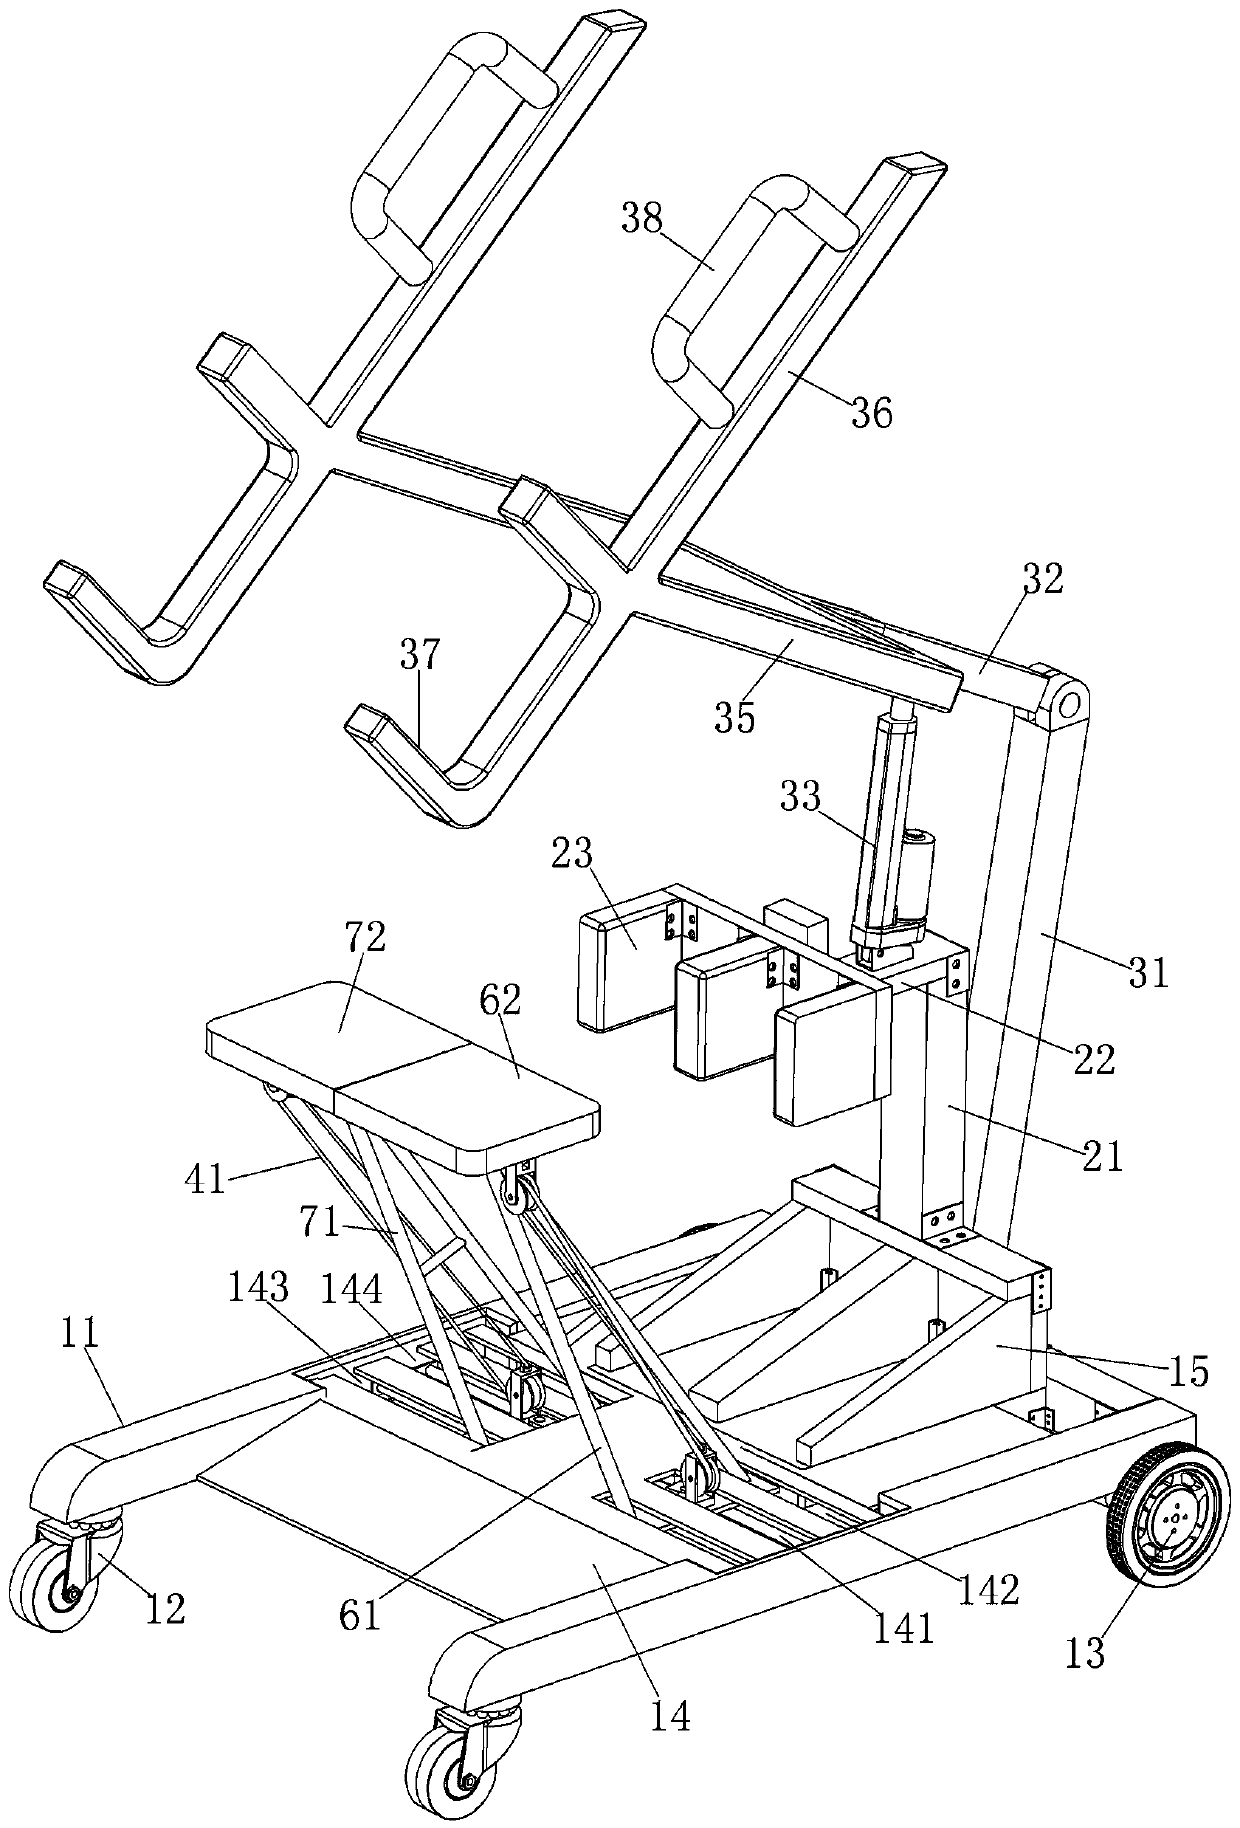 Standing assisting wagon with combined type seat plate